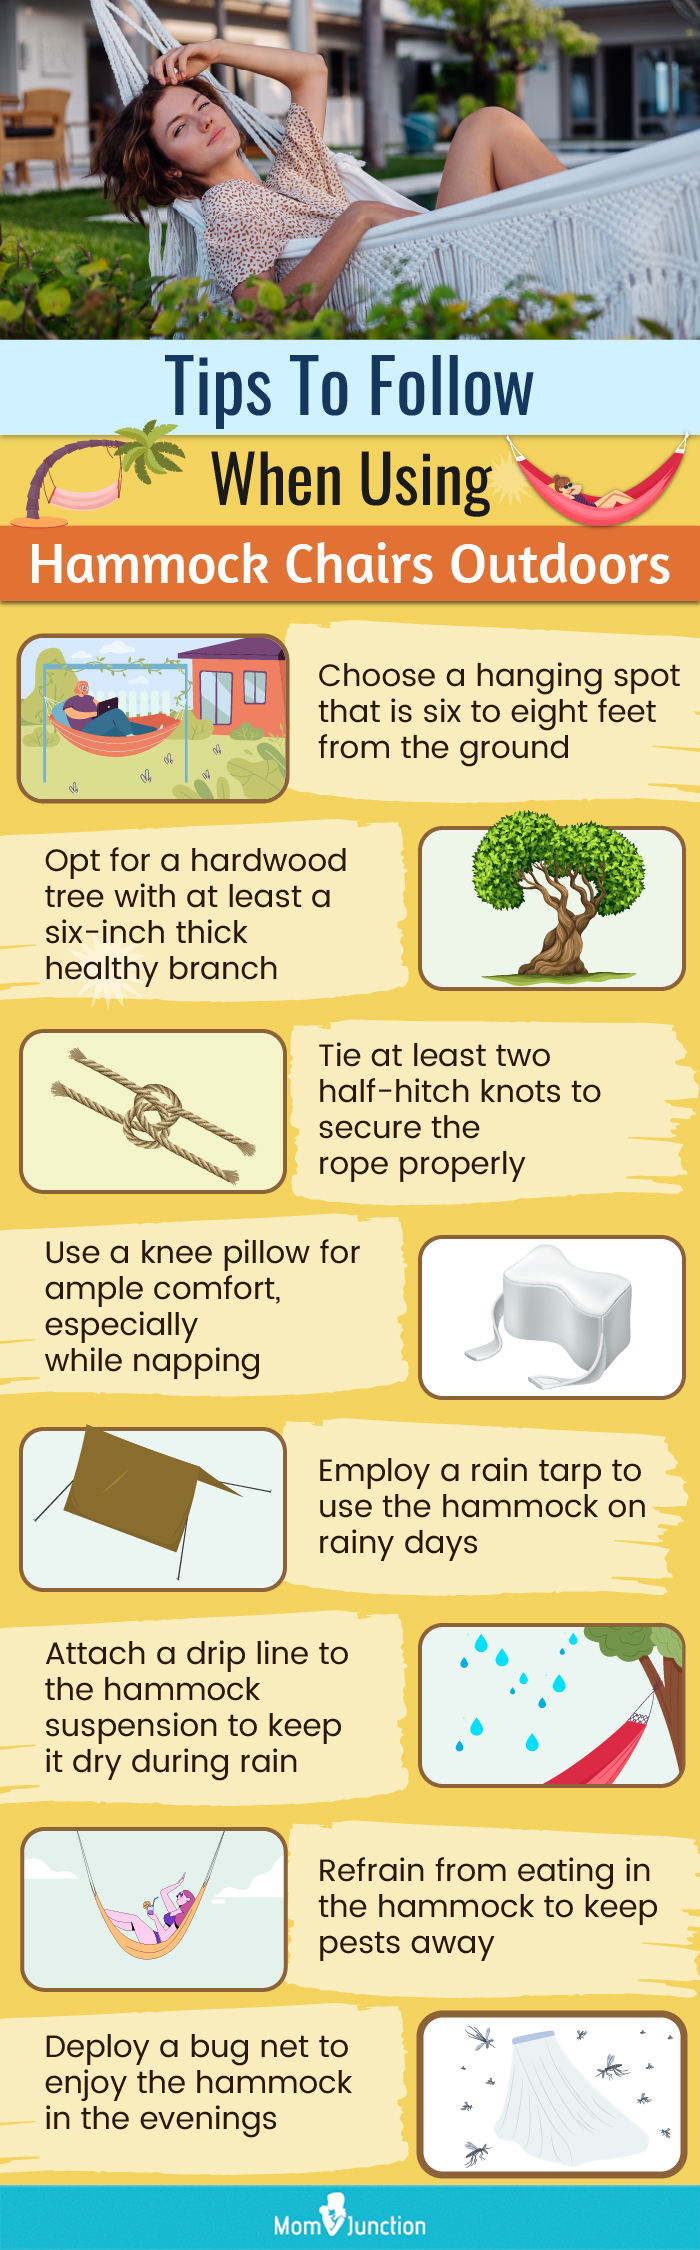 Tips To Follow When Using Hammock Chairs Outdoors (infographic)